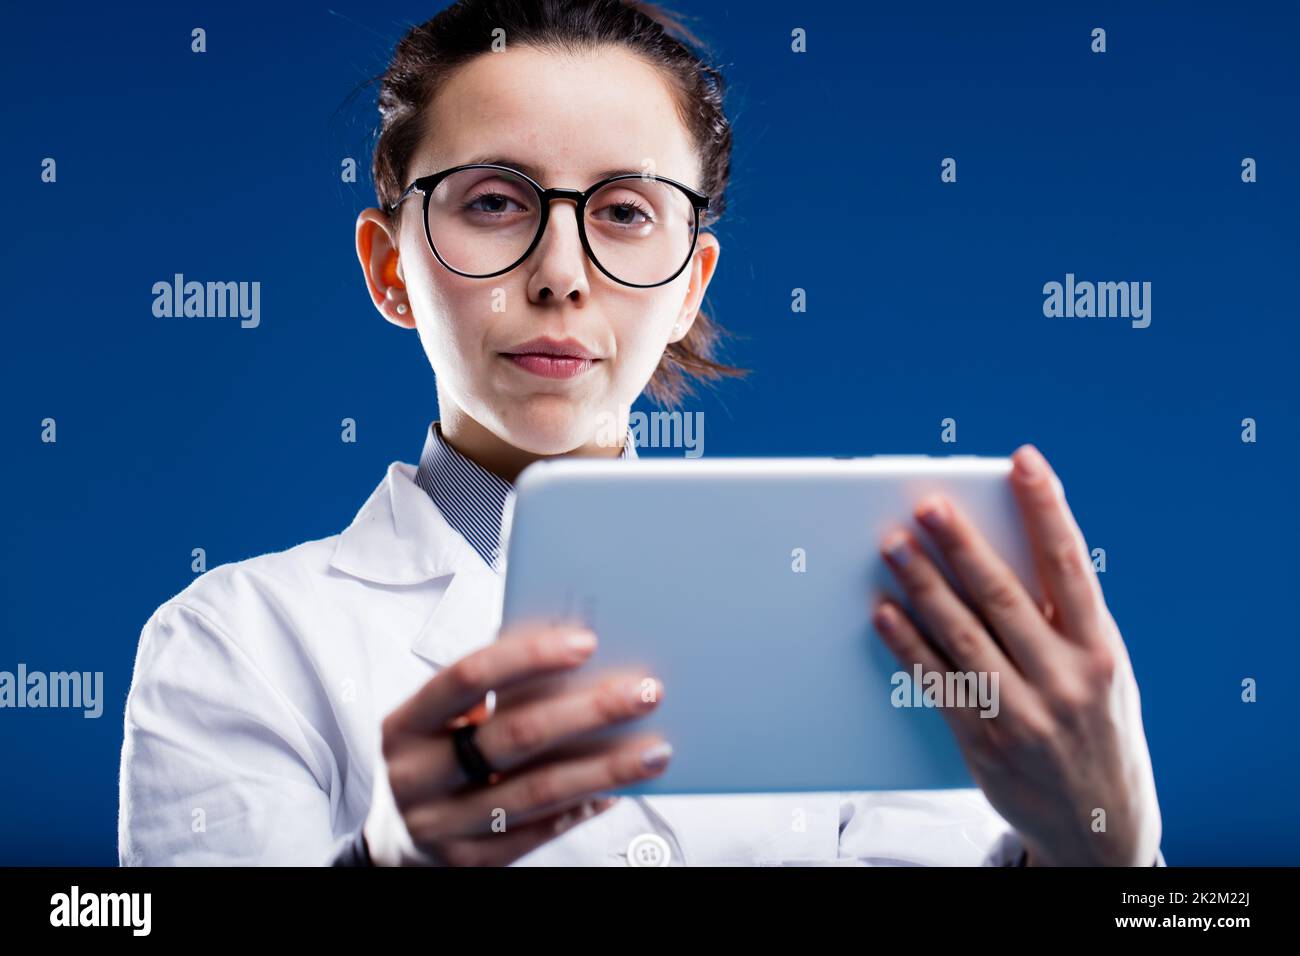 experienced and stern medical doctor Stock Photo